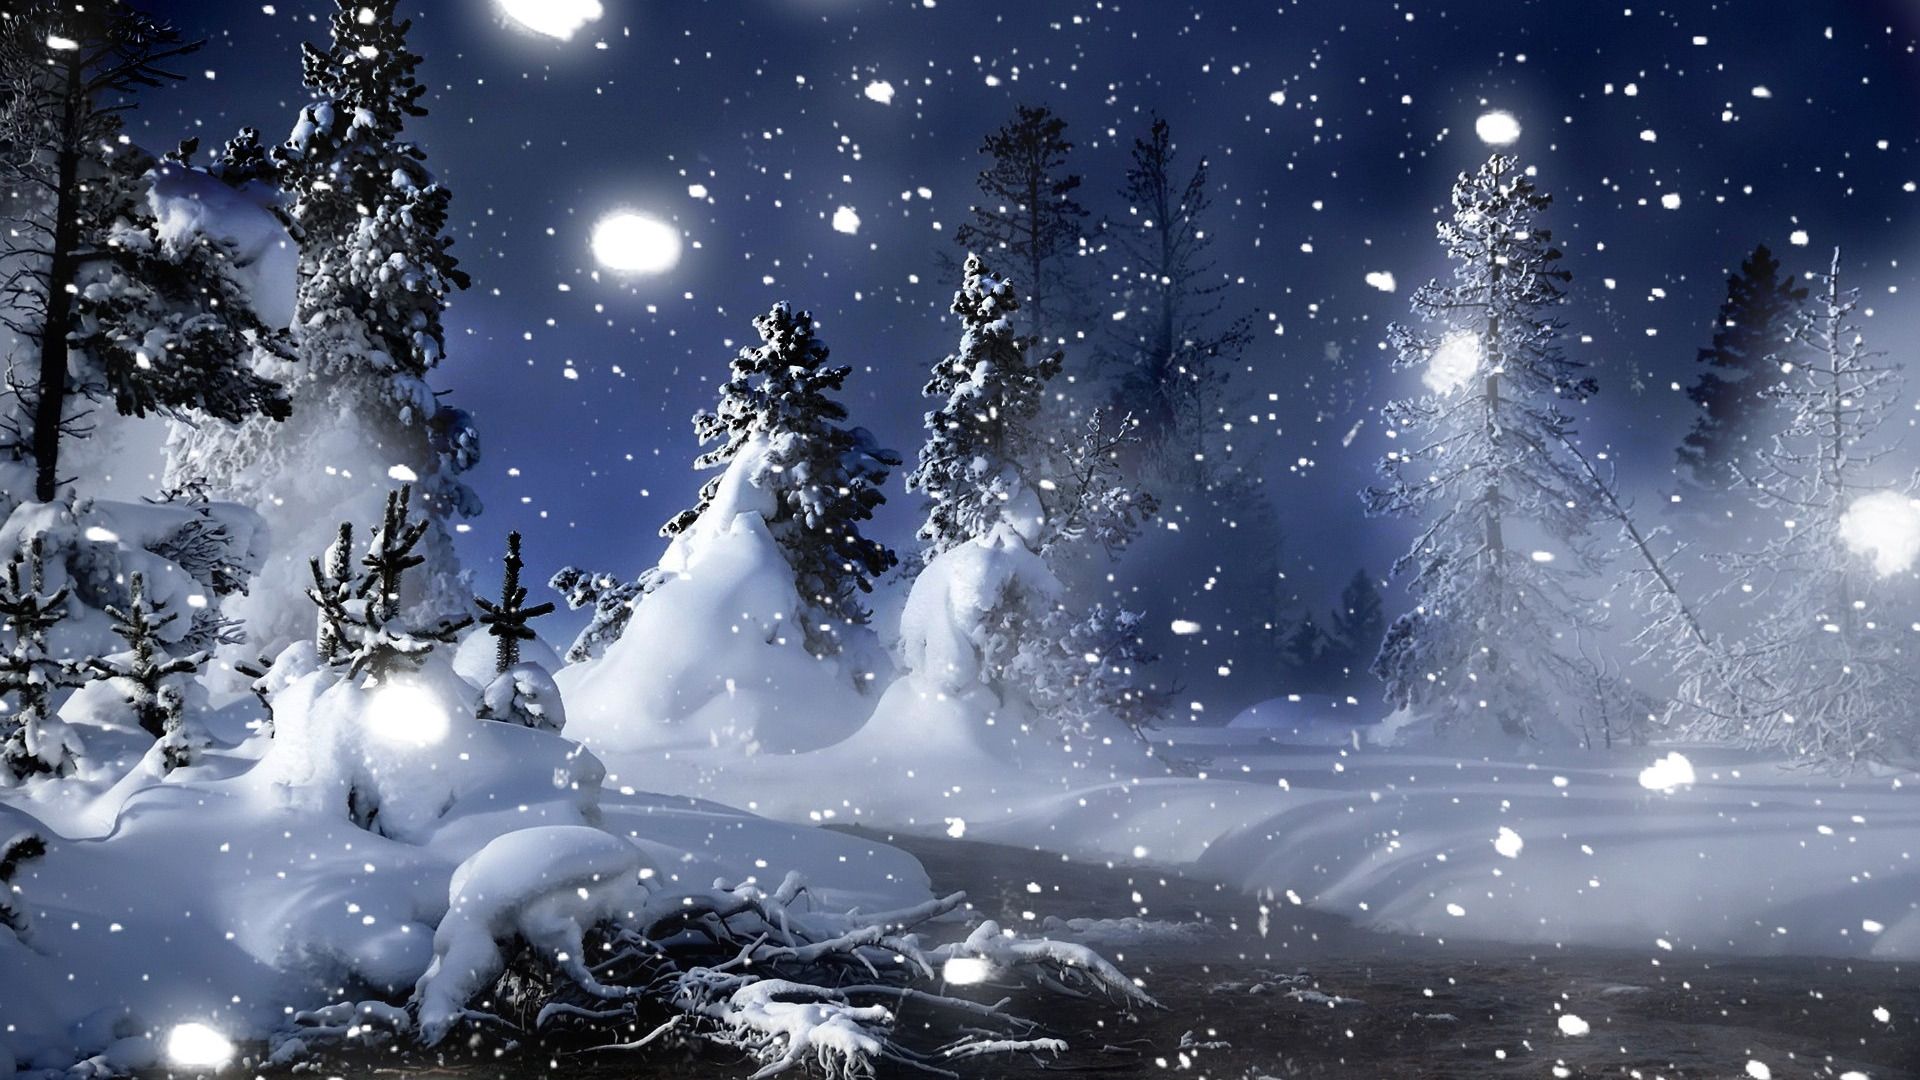 Winter Night Photos Download The BEST Free Winter Night Stock Photos  HD  Images